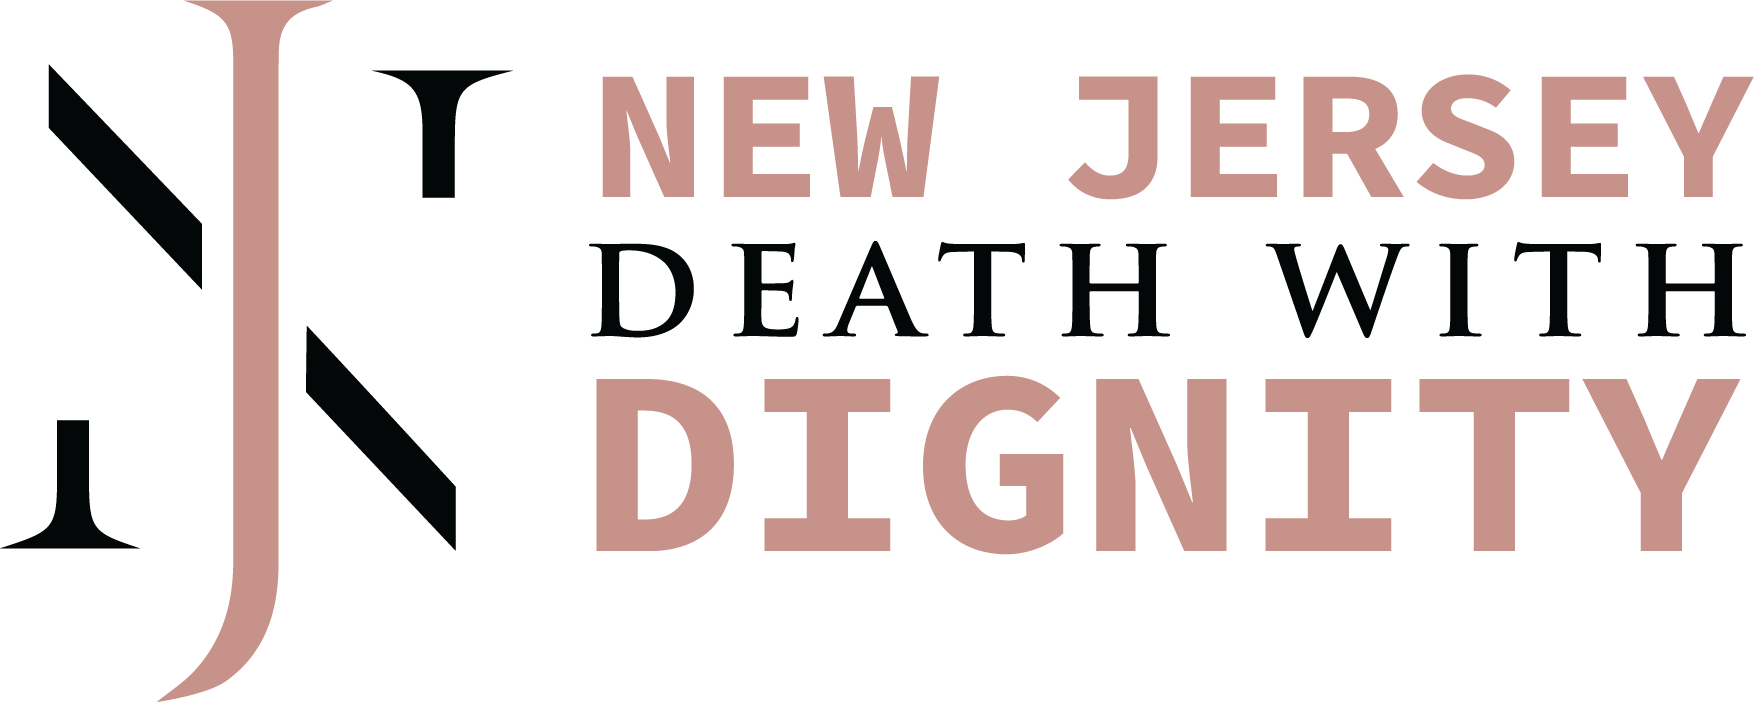 New Jersey Death with Dignity - You Are Not Alone - yanaec.com